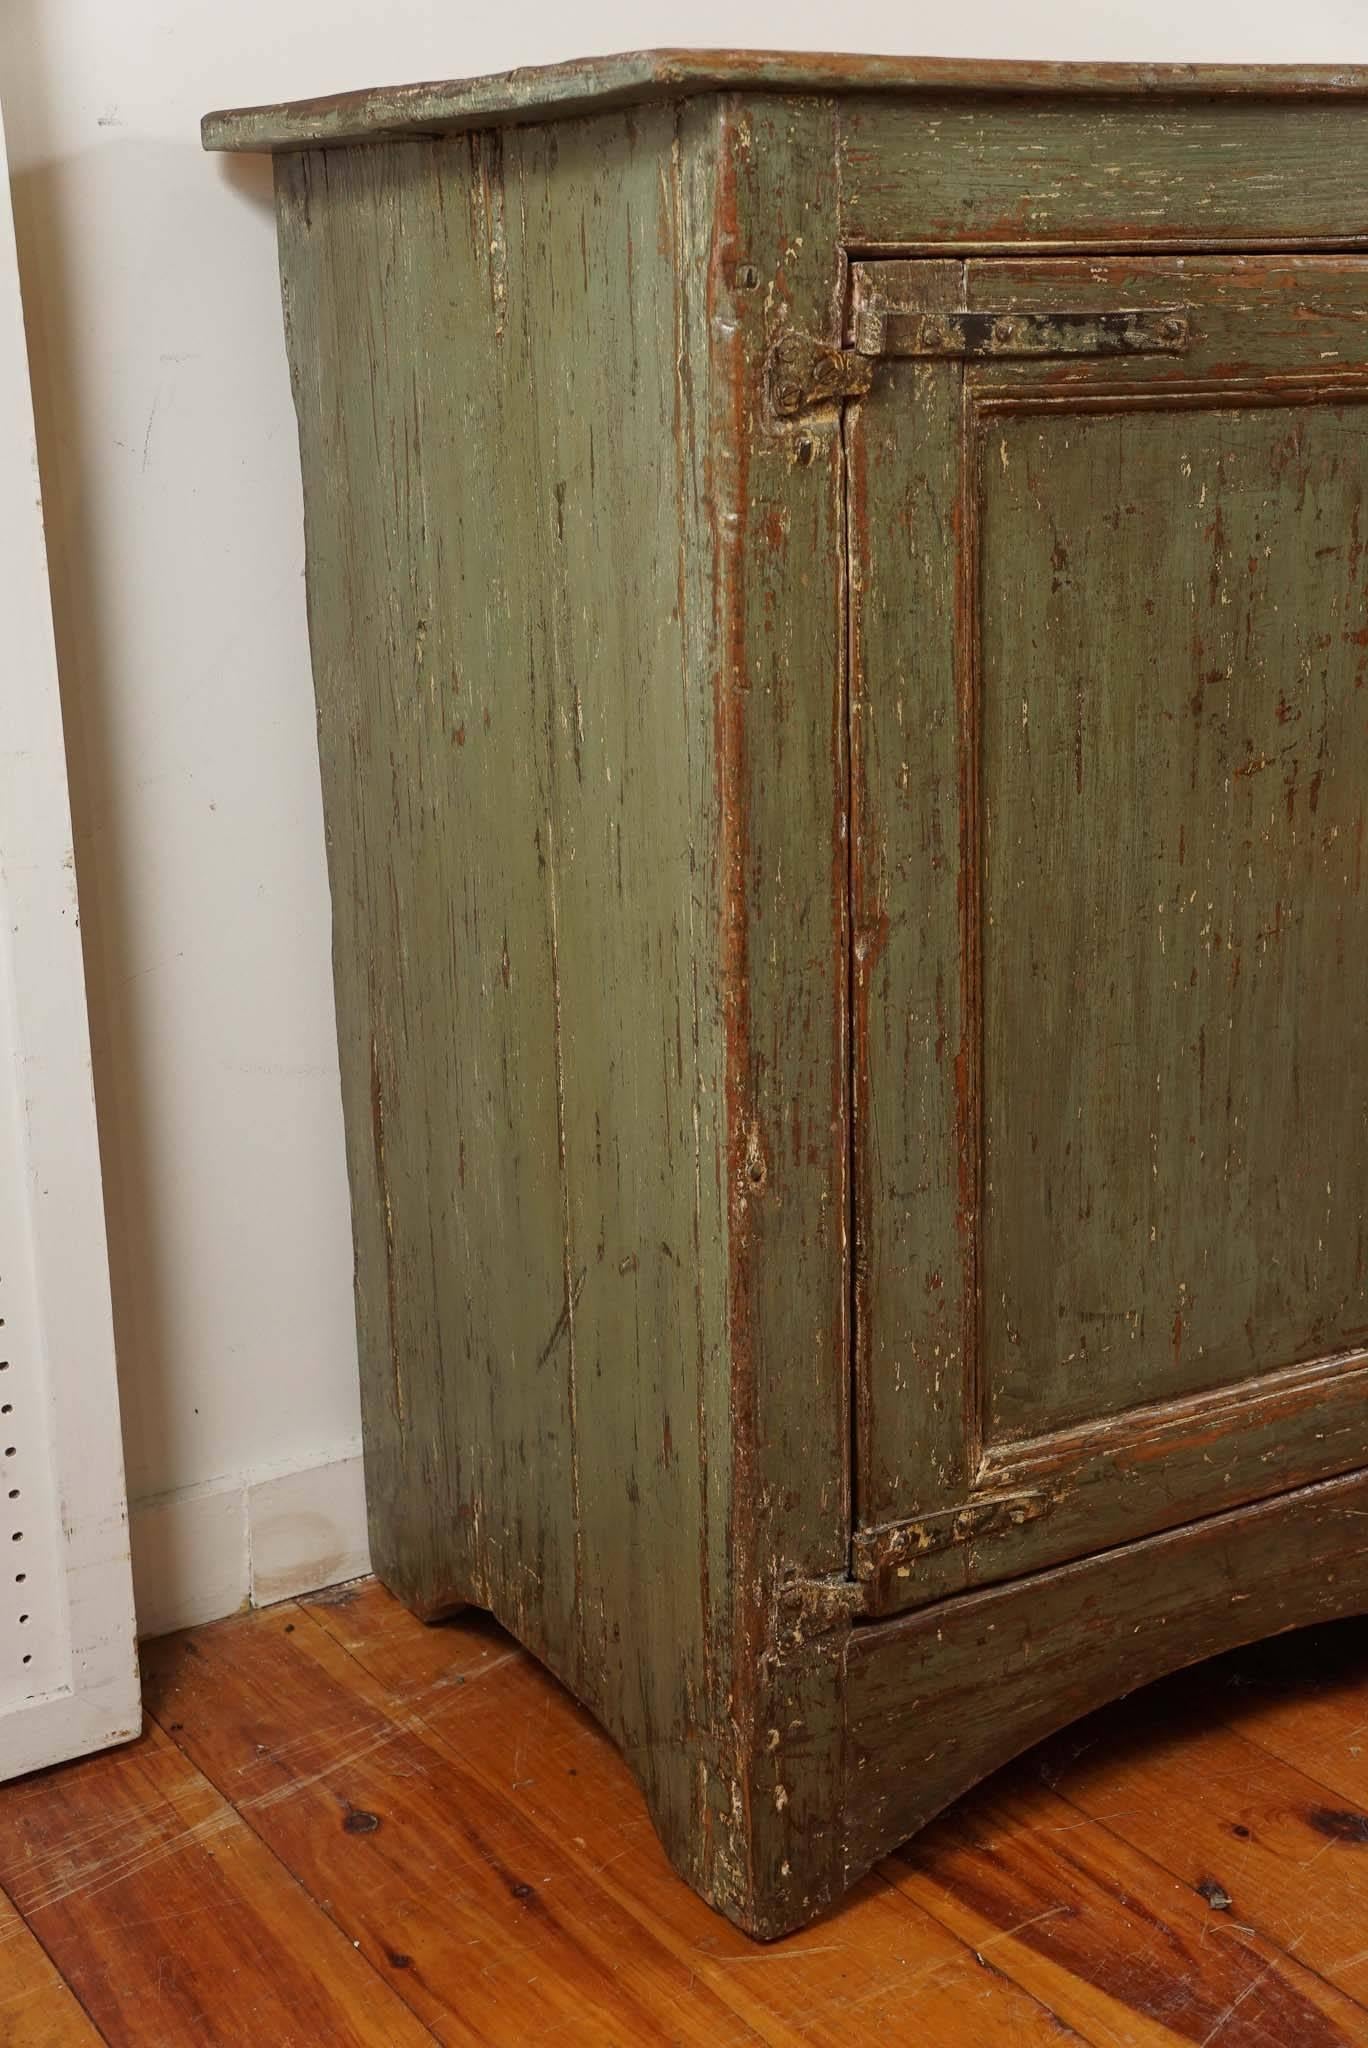 It’s a dead heat as to weather you will fall in love with the rich deep color green or the fantastic hinges and hardware first. Both are very apparent as soon as you look at this 1860 original painted buffet. Plenty of storage and shelf inside and a